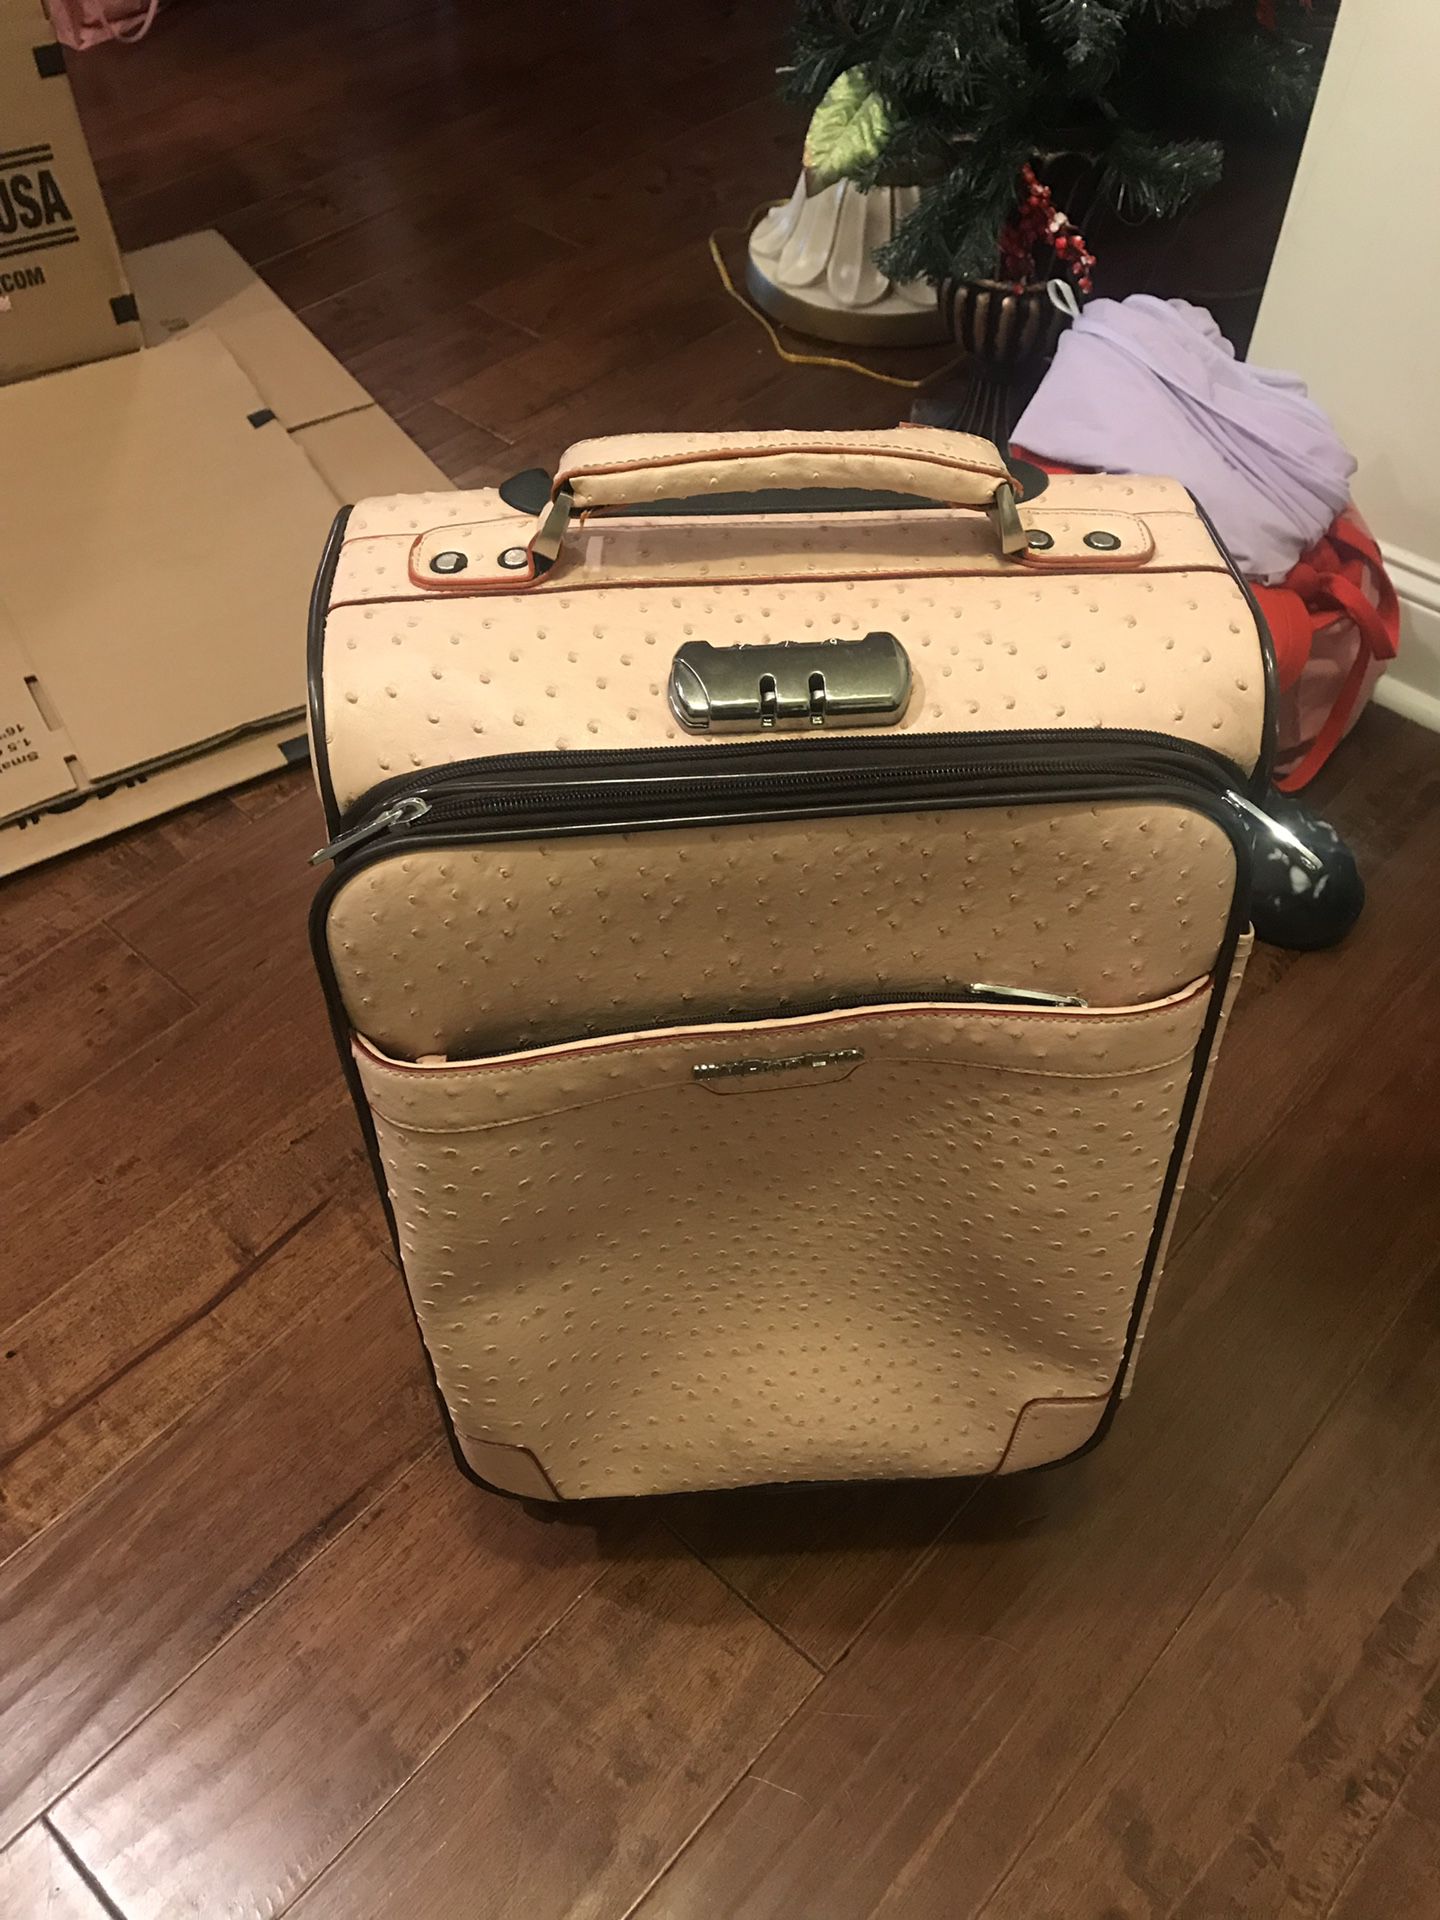 Carry-on size suitcase